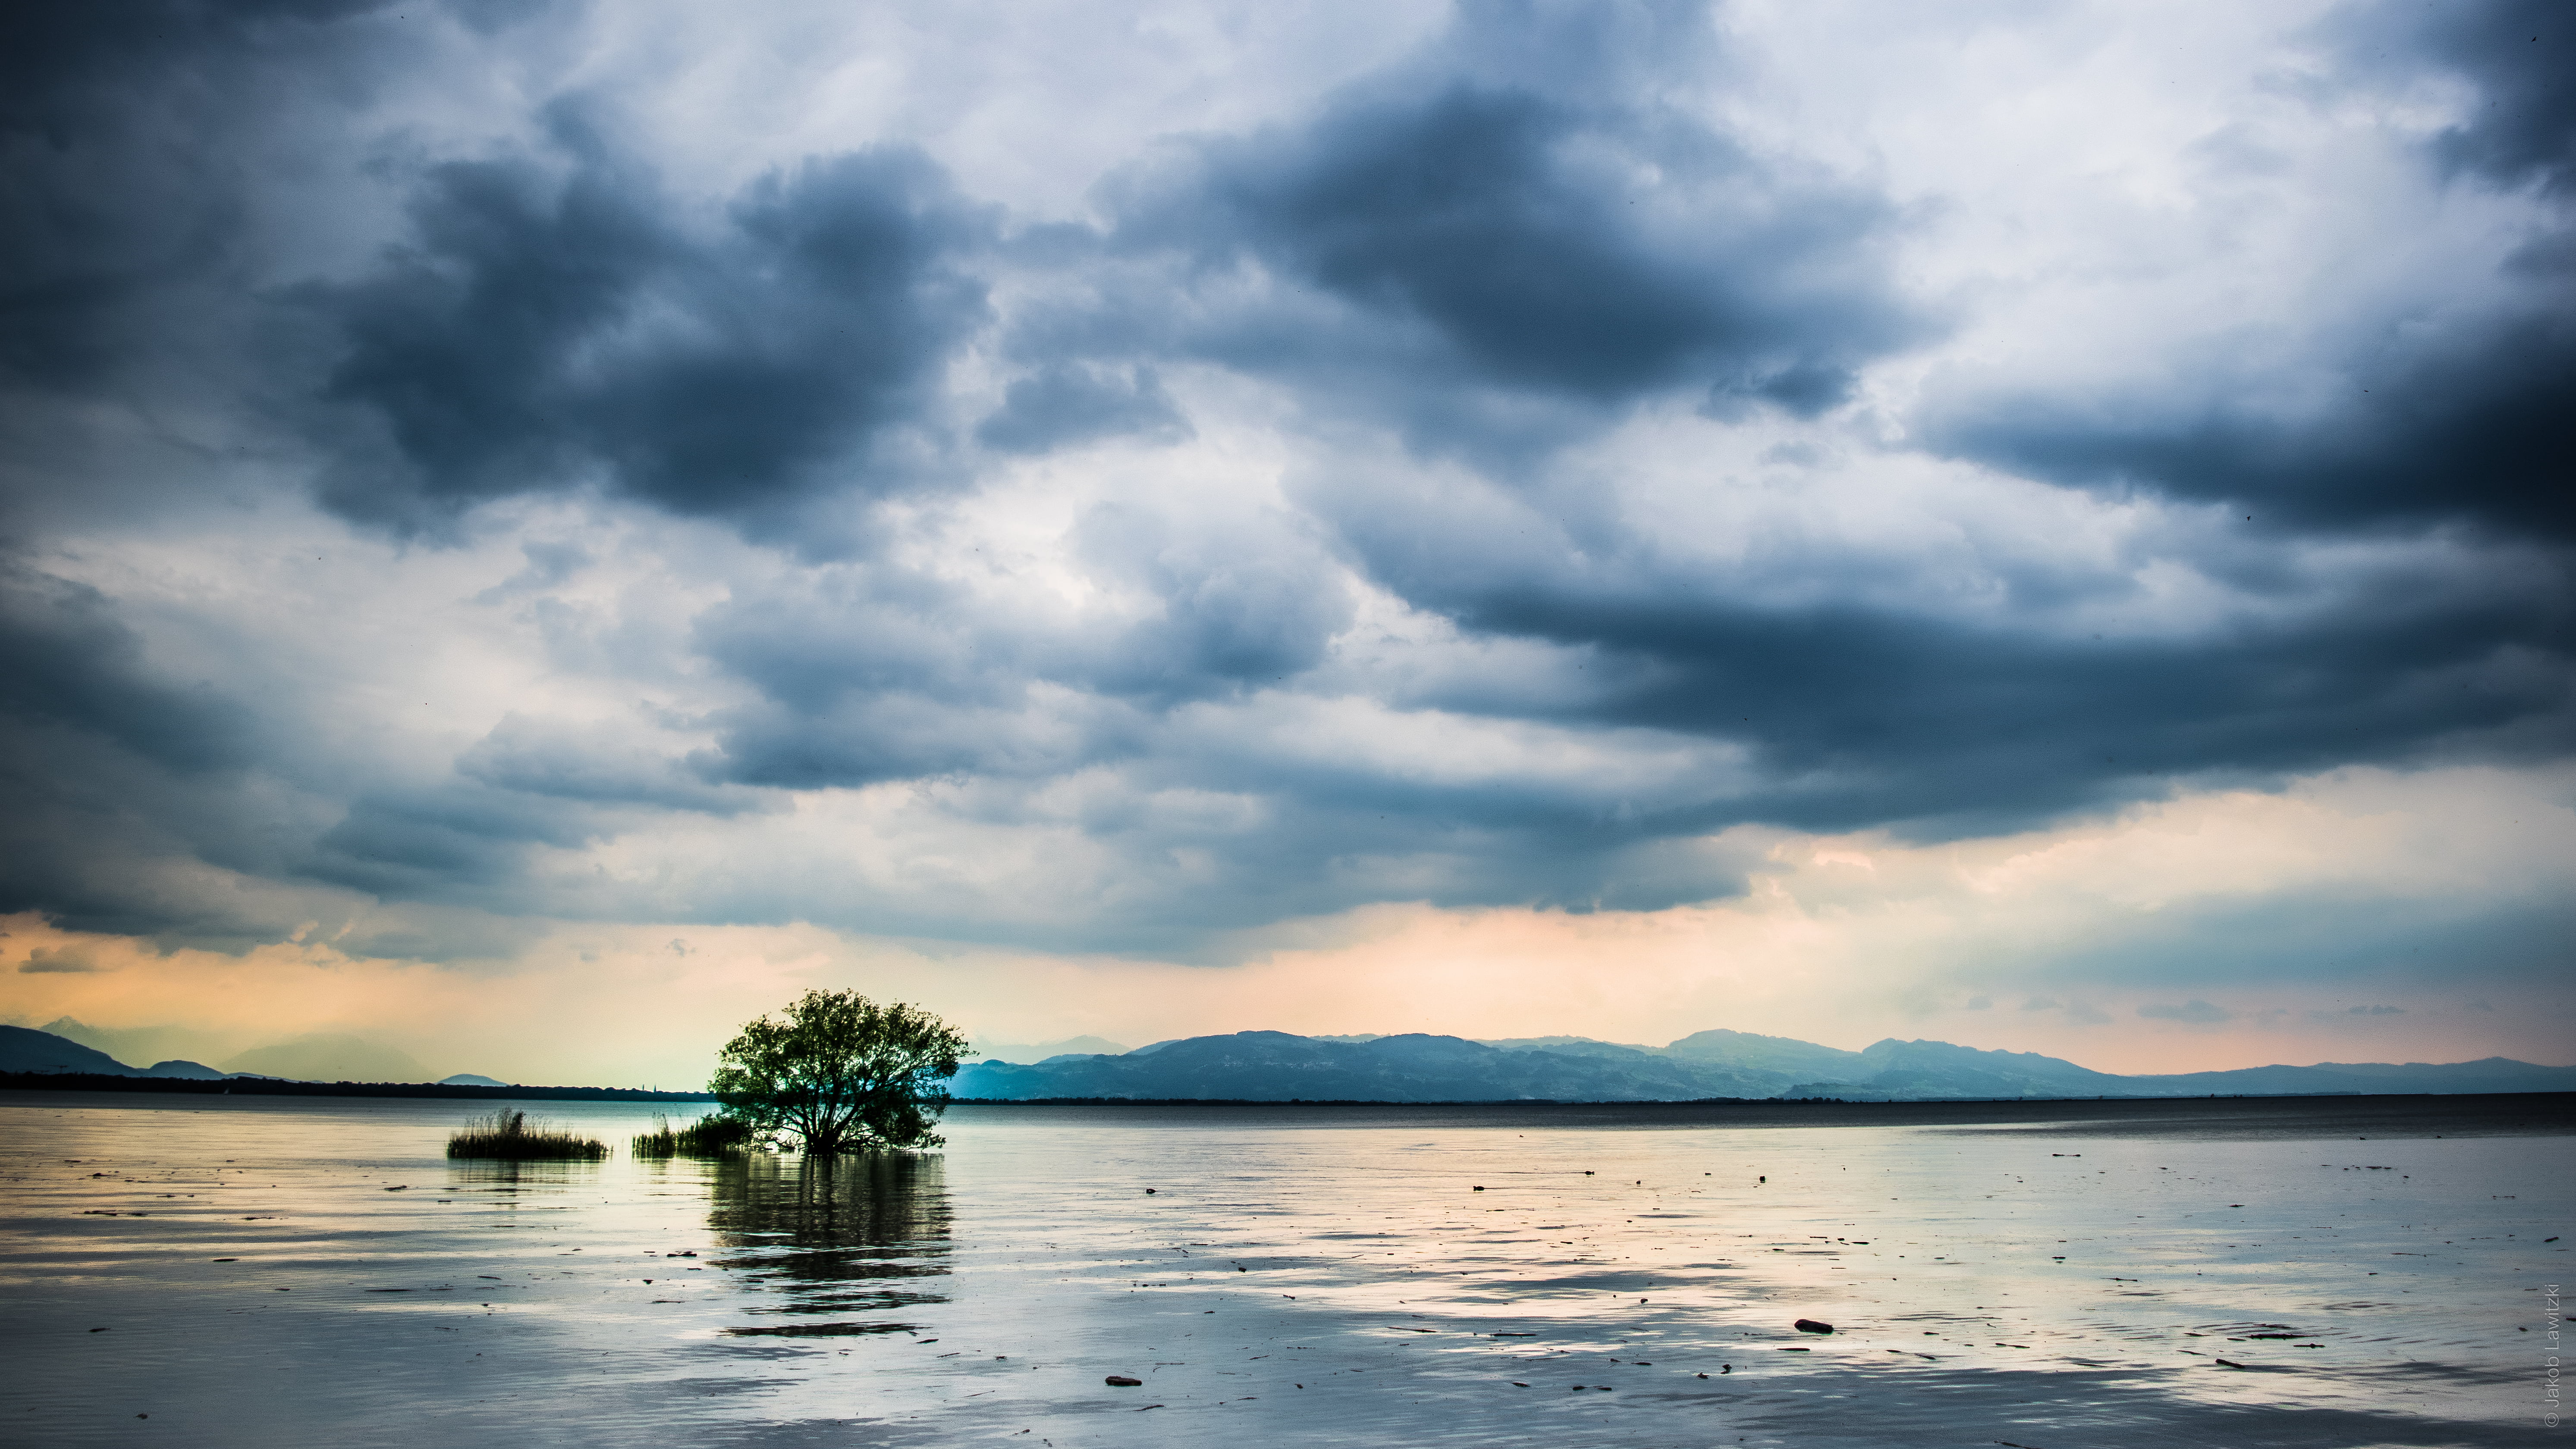 body of water with tree under cloudy sky